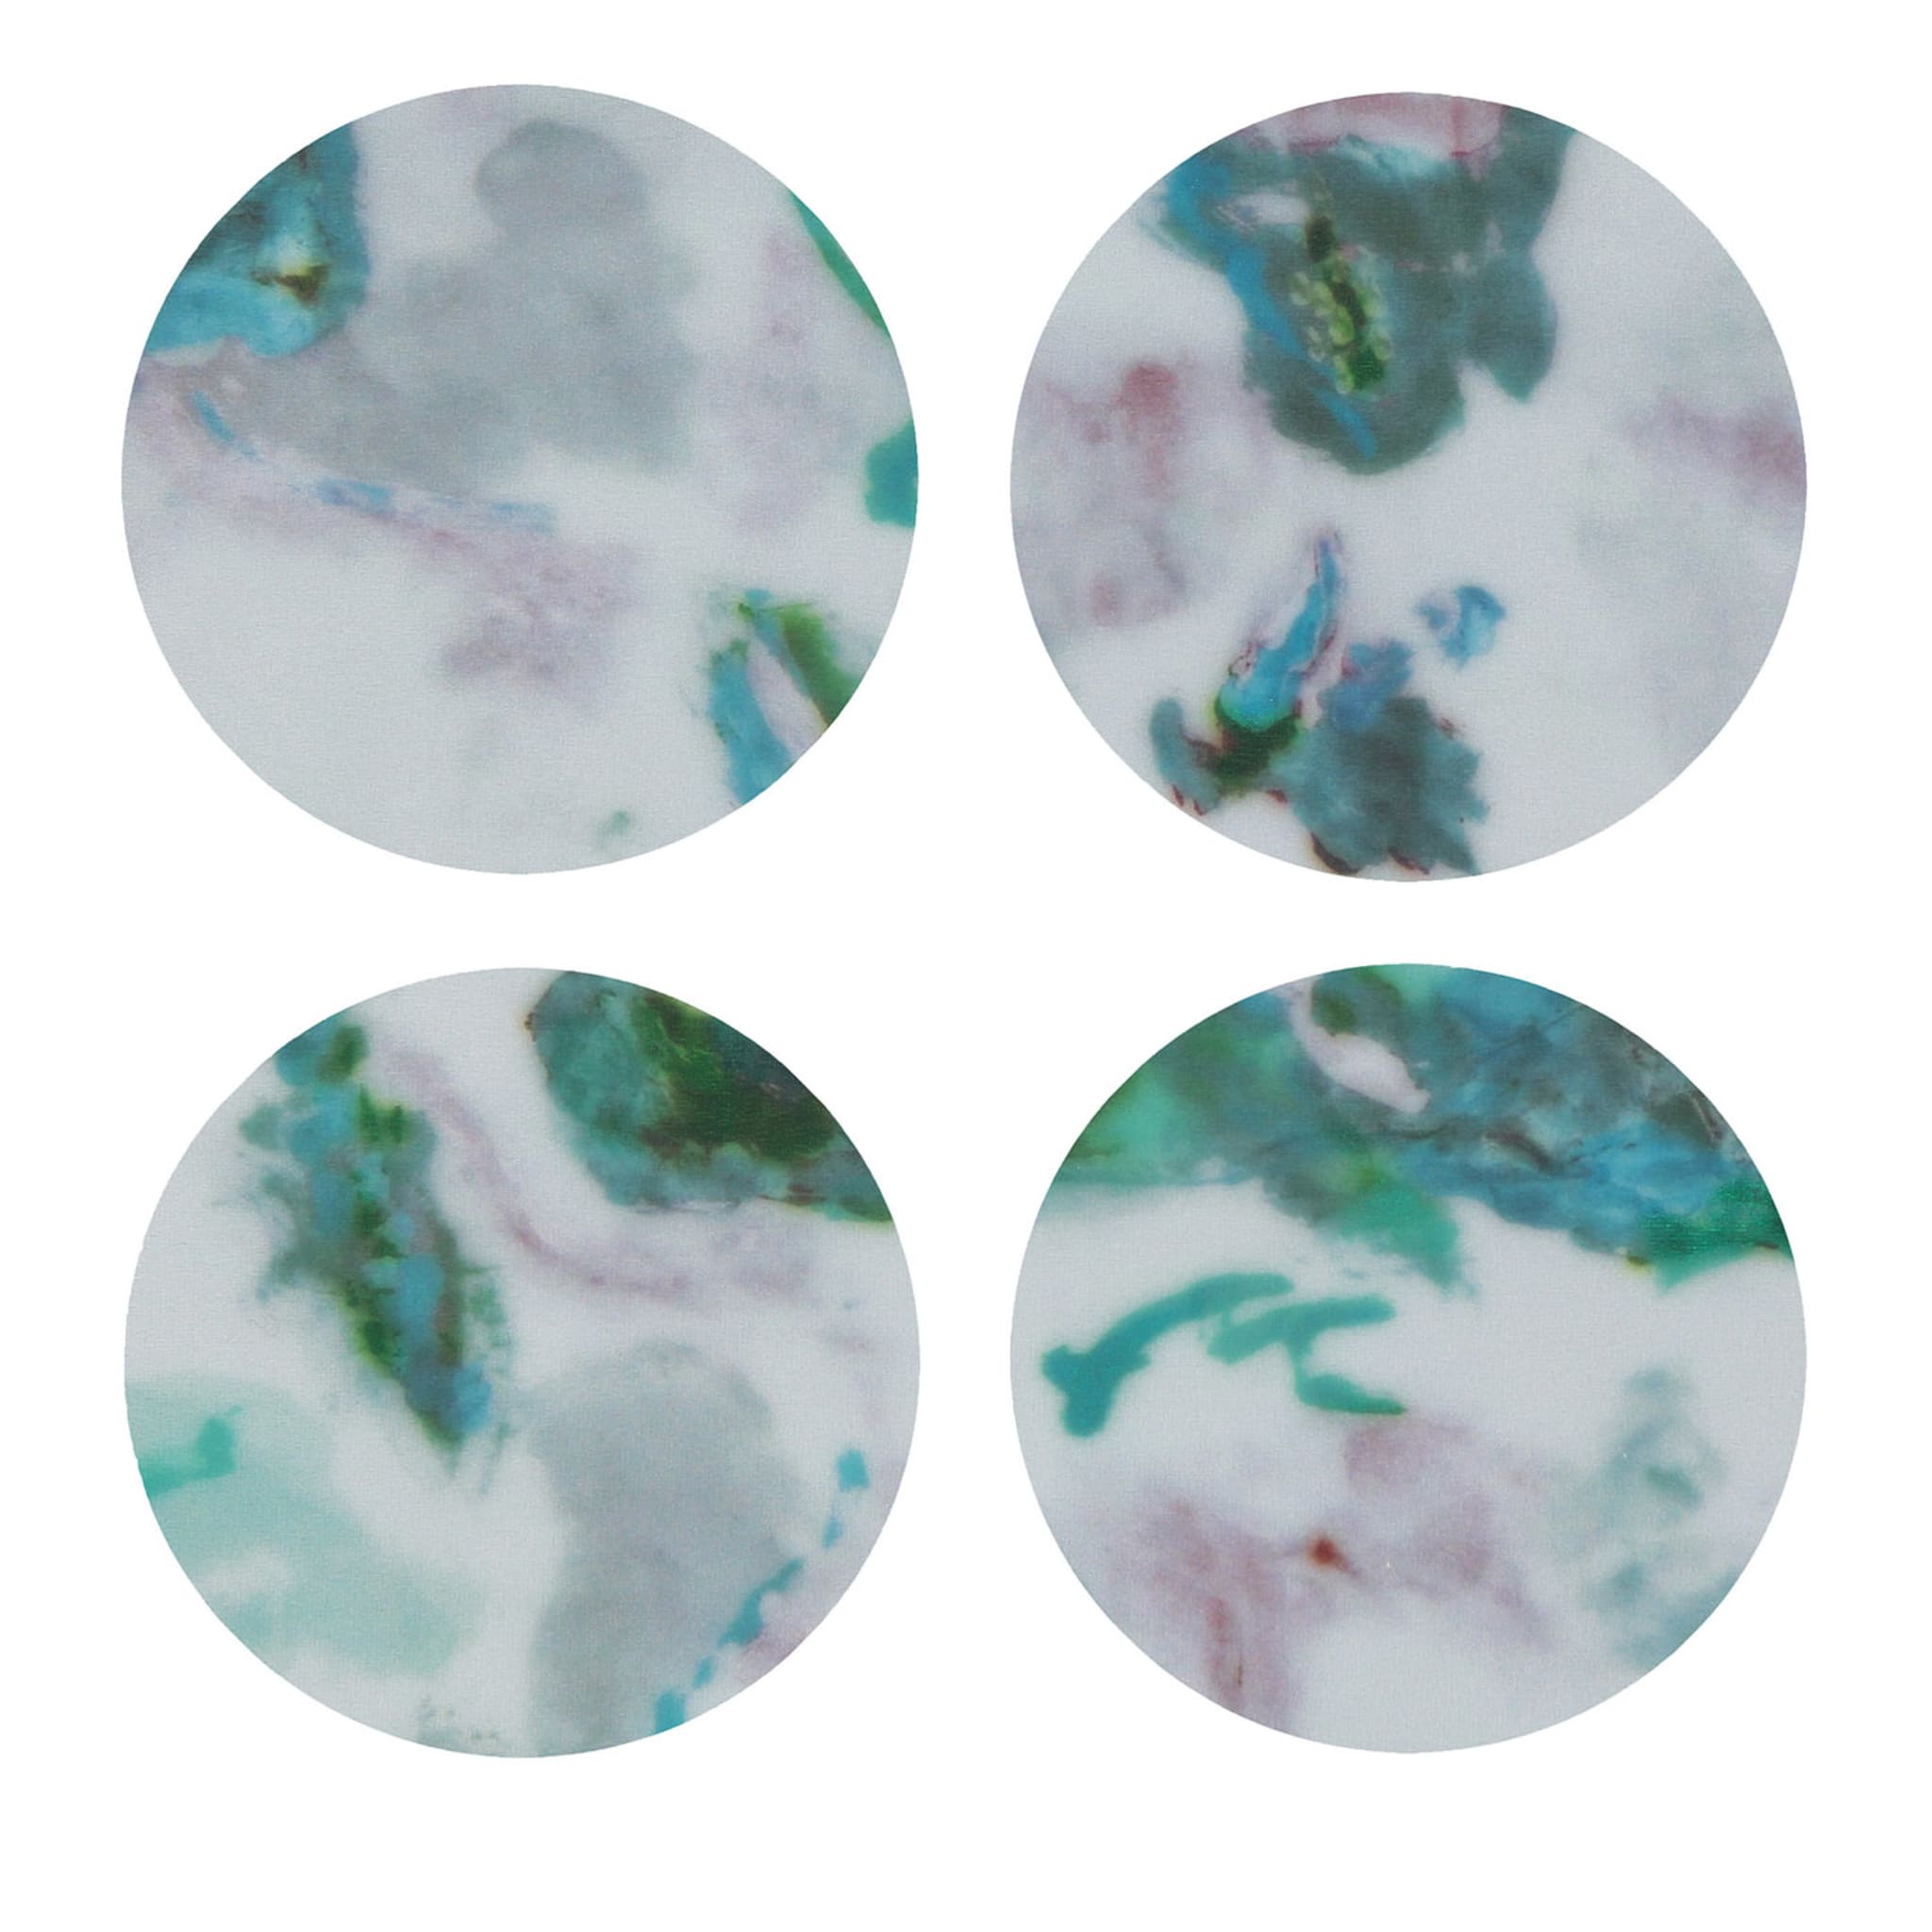 Apollo Set of 8 Mottled Polychrome Coasters - Main view